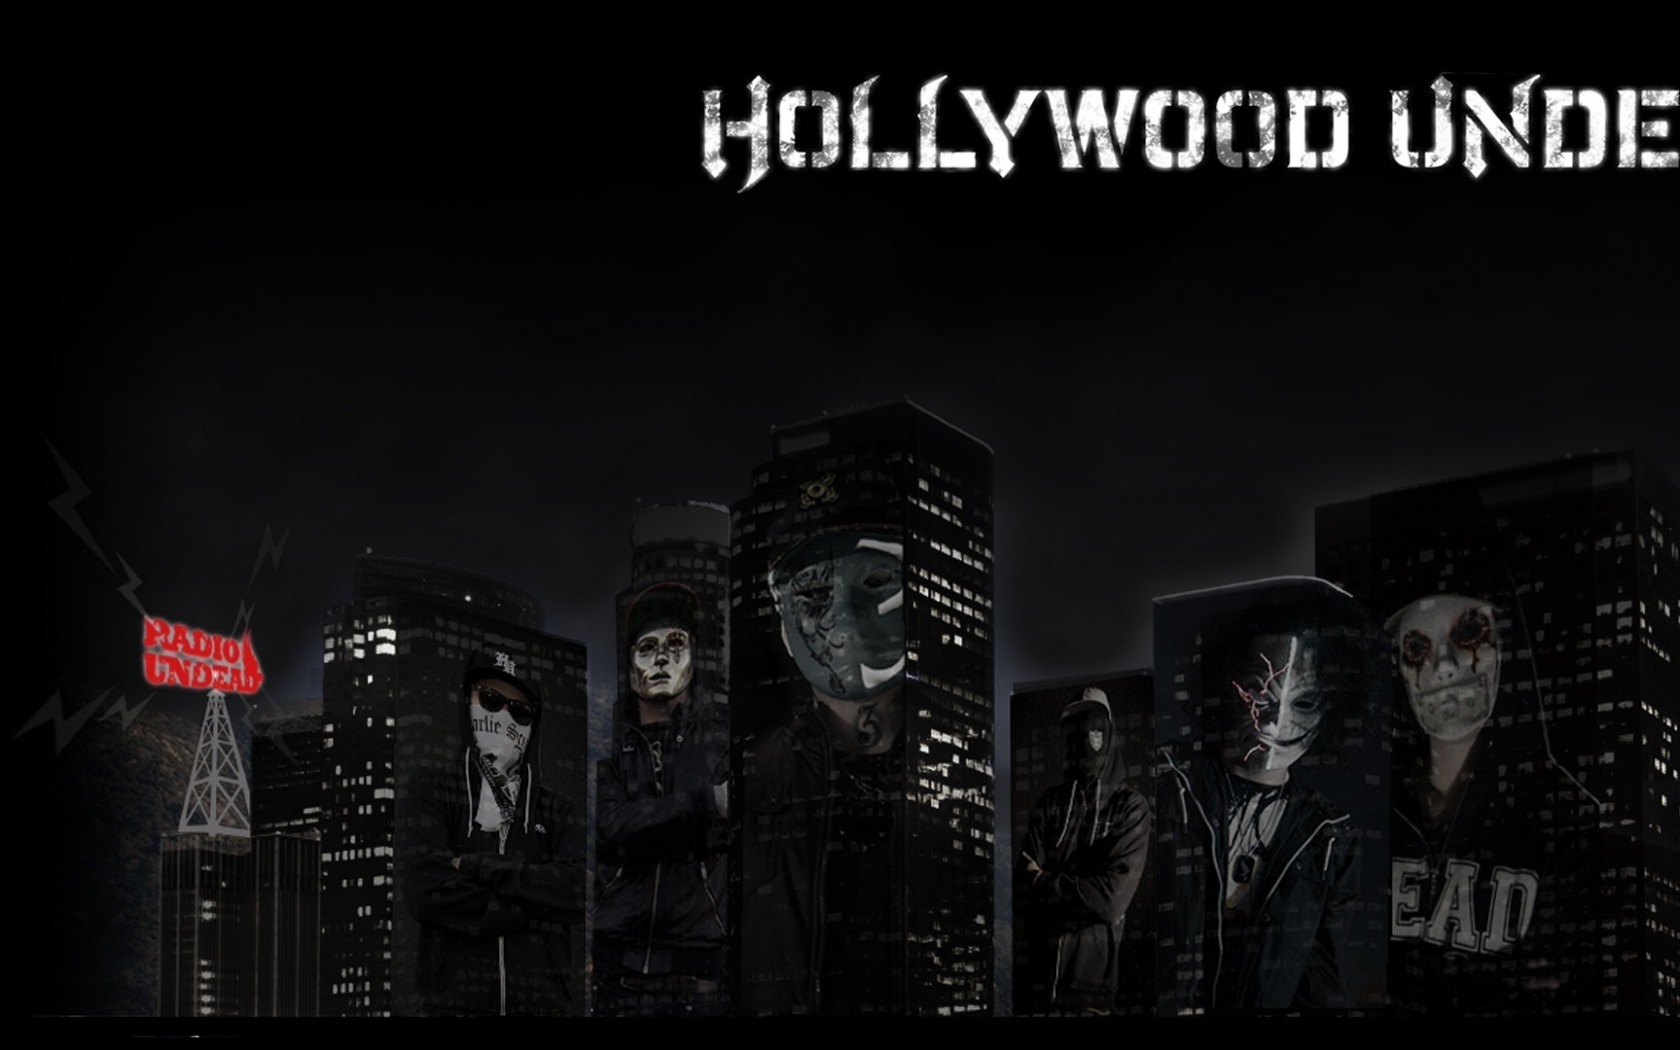  hollywood undead 1920x1080 wallpaper Entertainment HD WallpaperHi Res